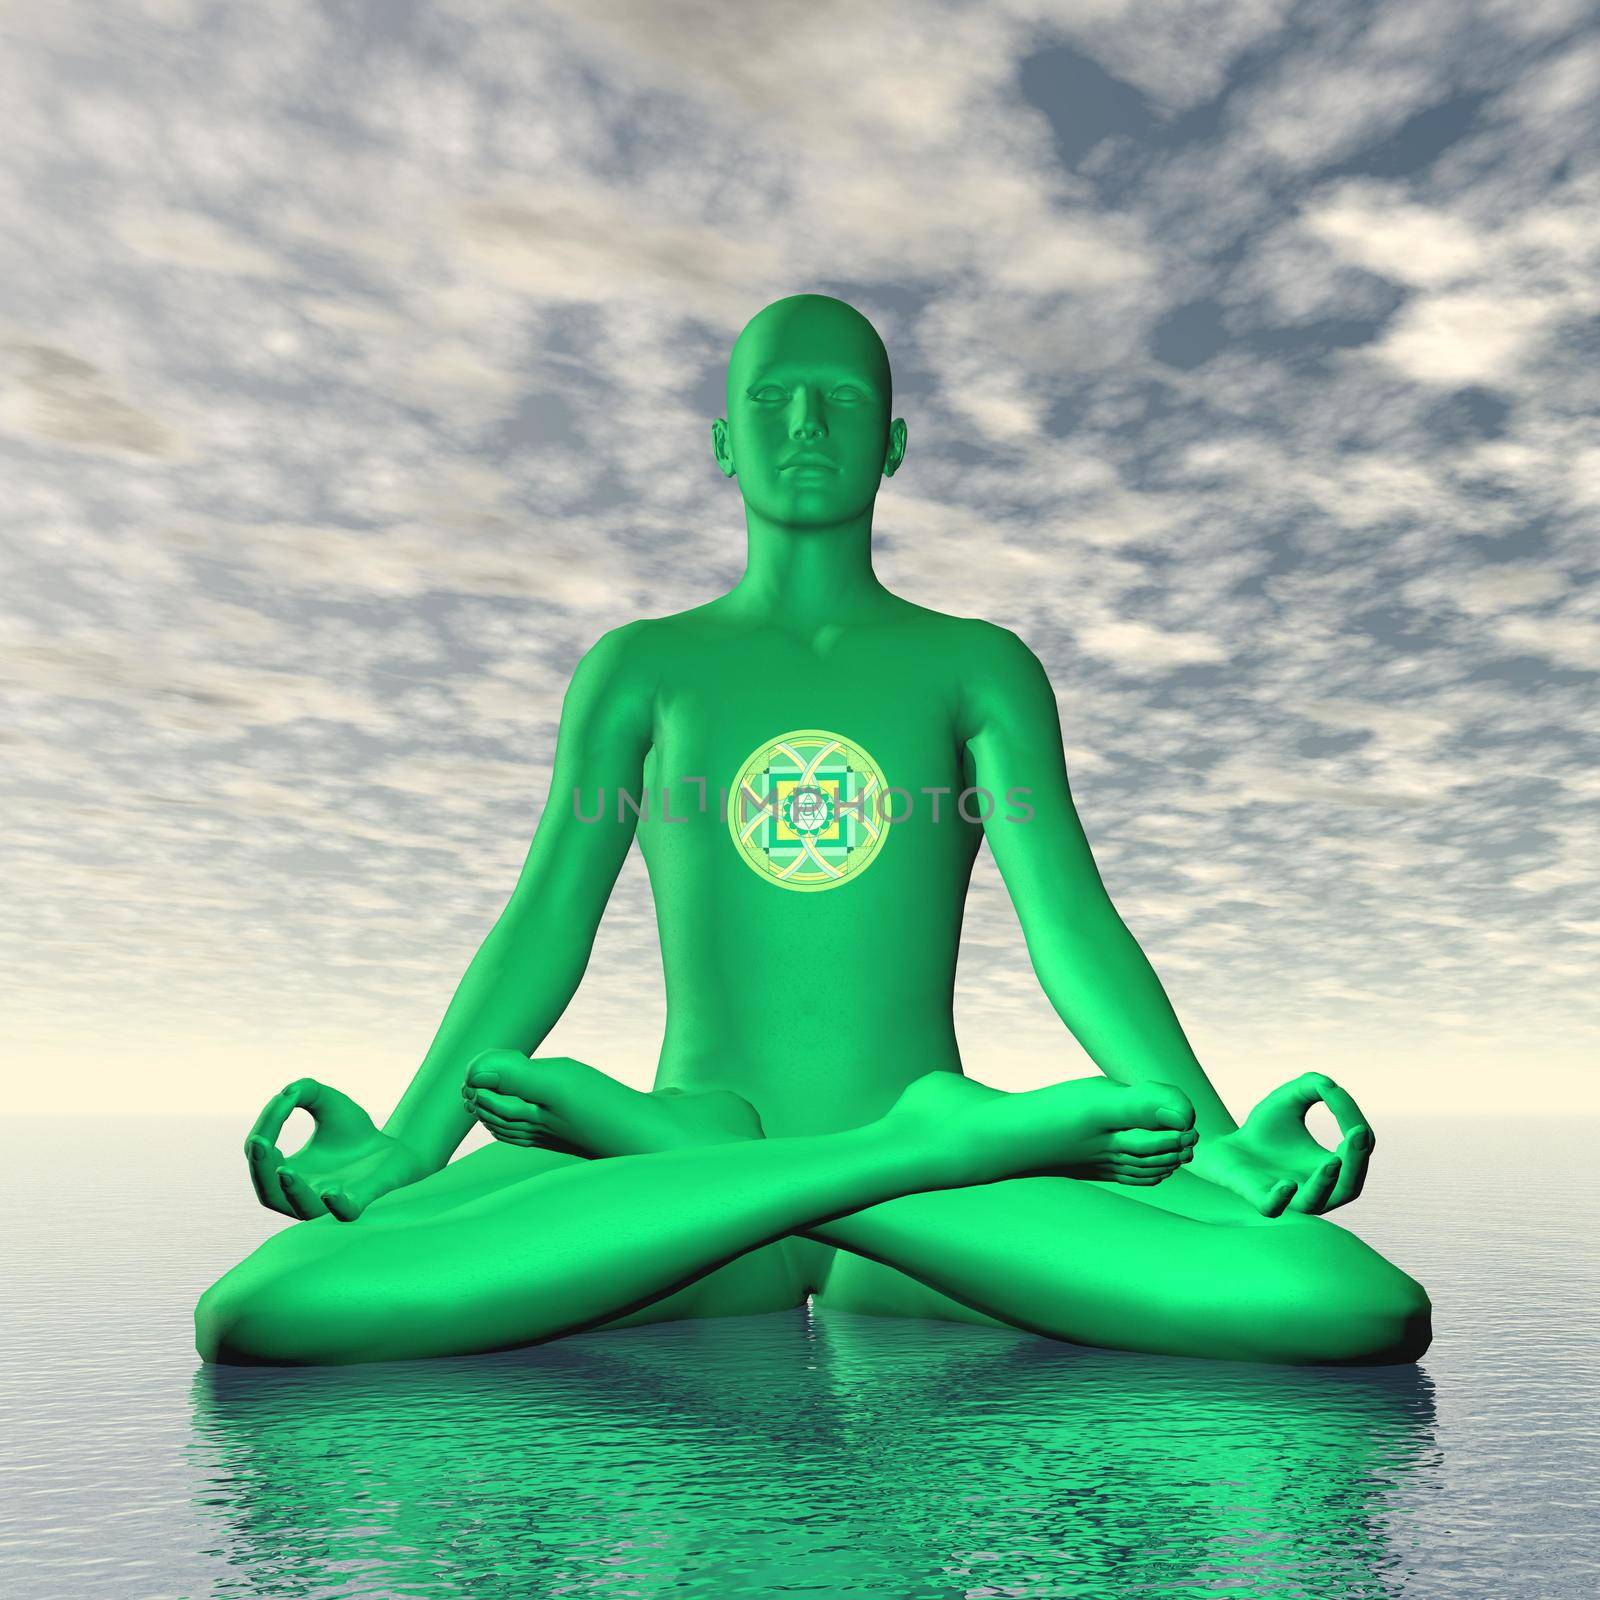 Silhouette of a man meditating with Green anahata or heart chakra symbol upon ocean in cloudy background - 3D render